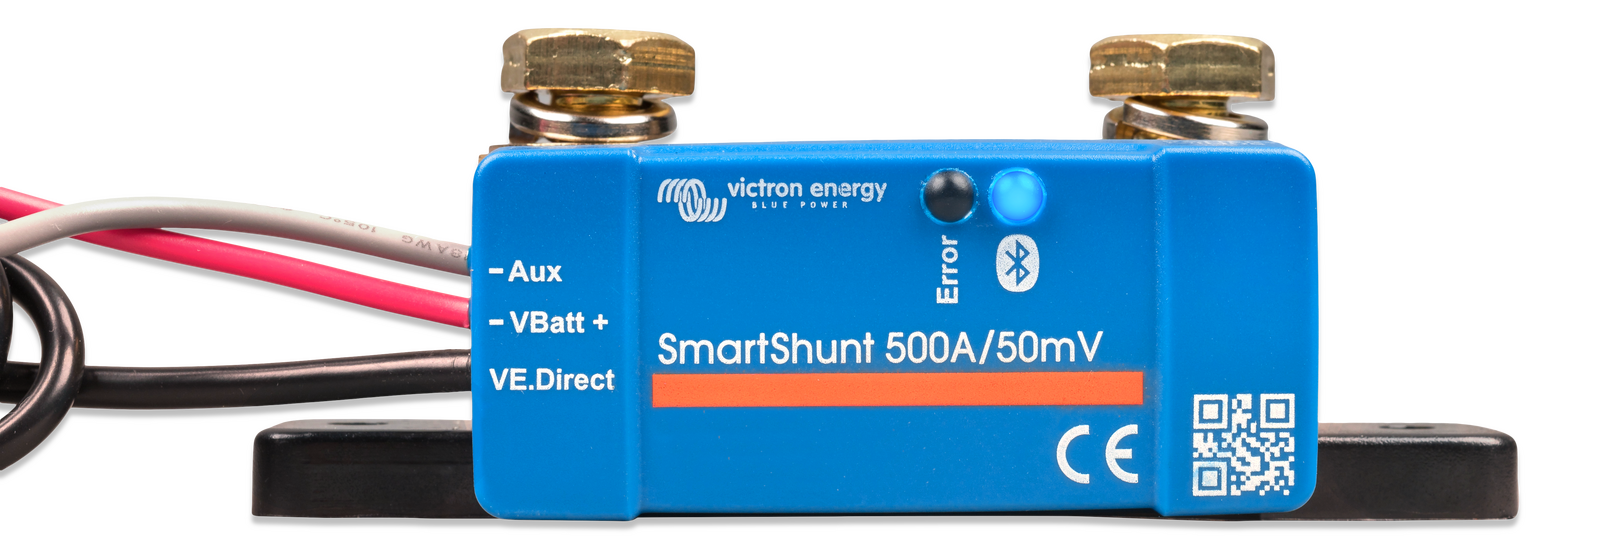 Victron Smart Shunt 500A Battery Monitor with Bluetooth IP65 Waterproof